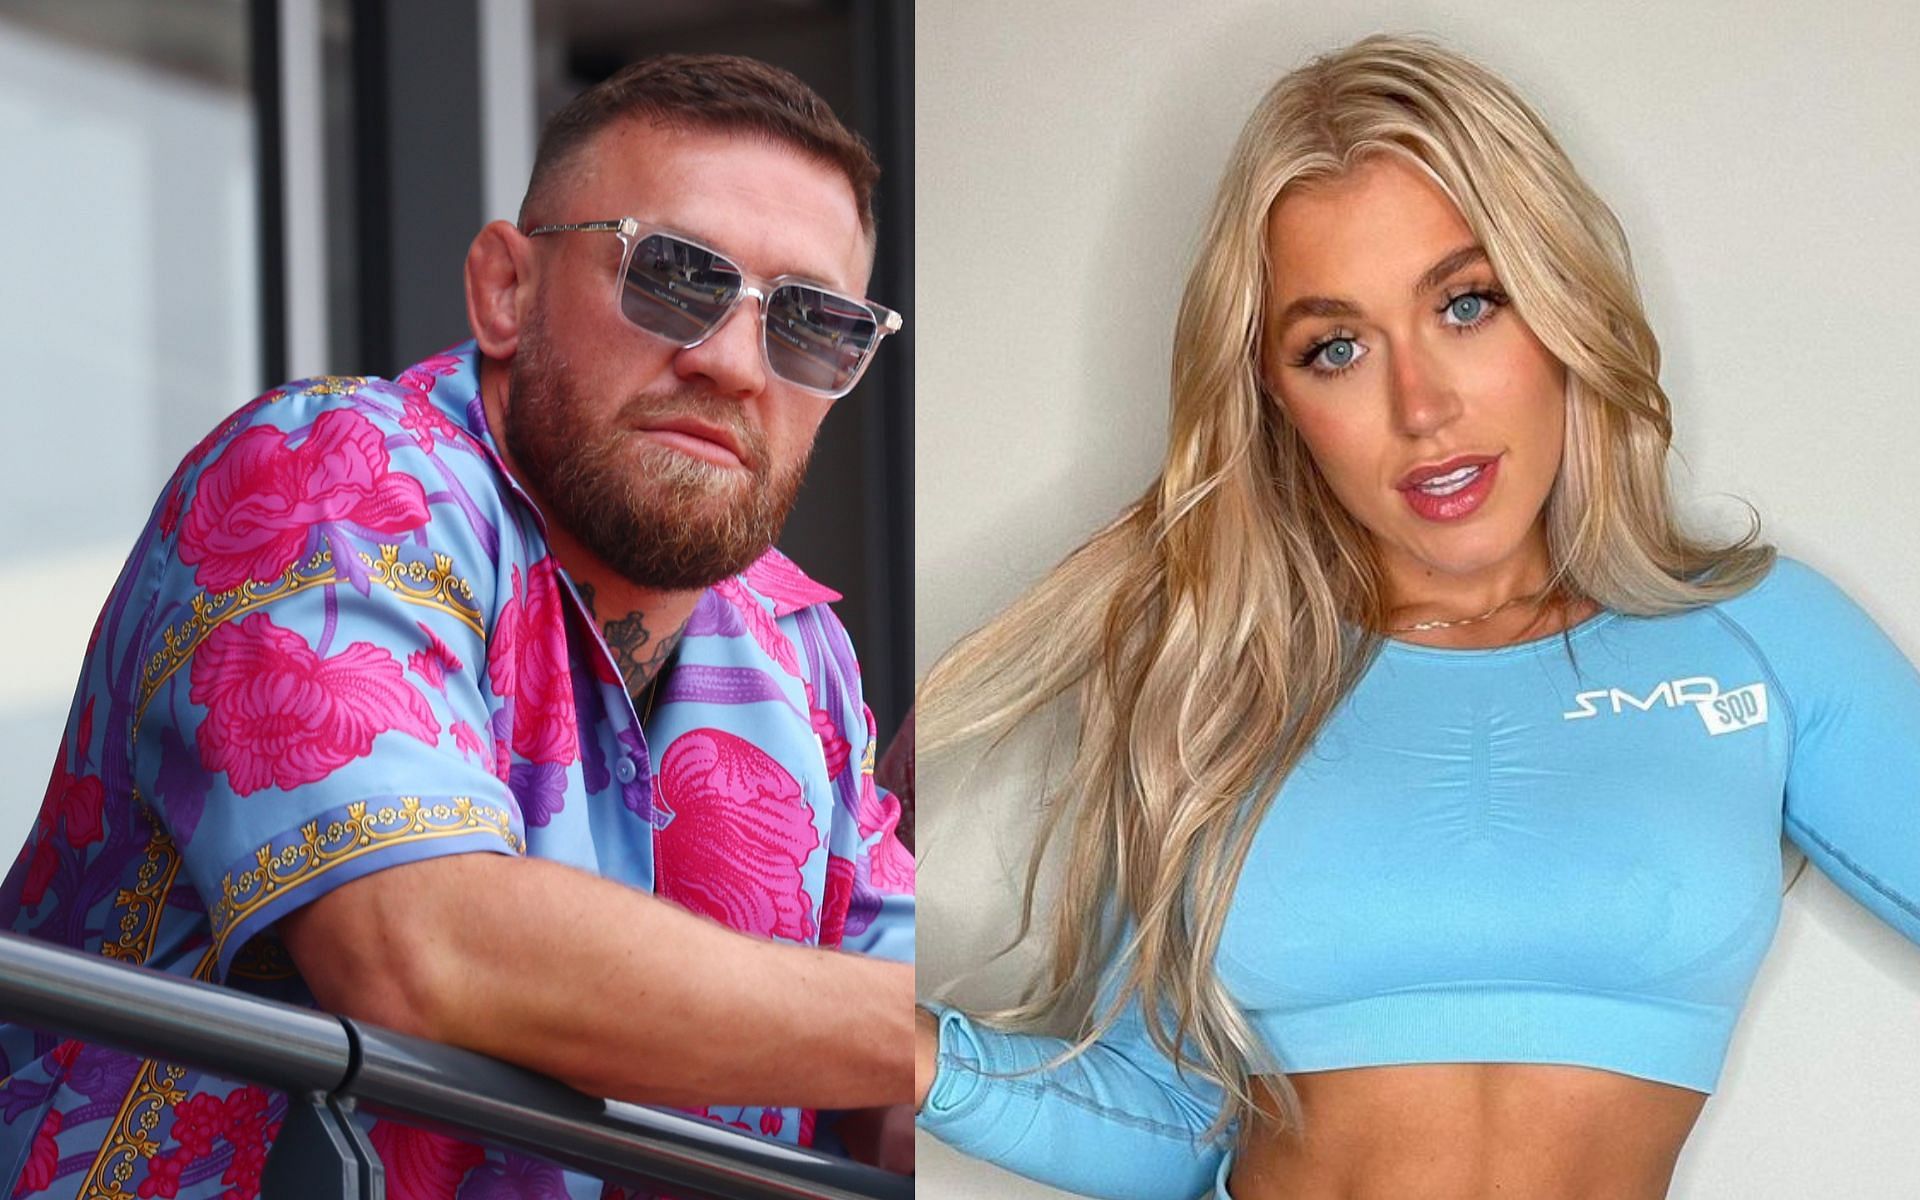 Conor McGregor (left) Elle Brooke (right) (image courtesy, right image @thedumbledong Instagram)